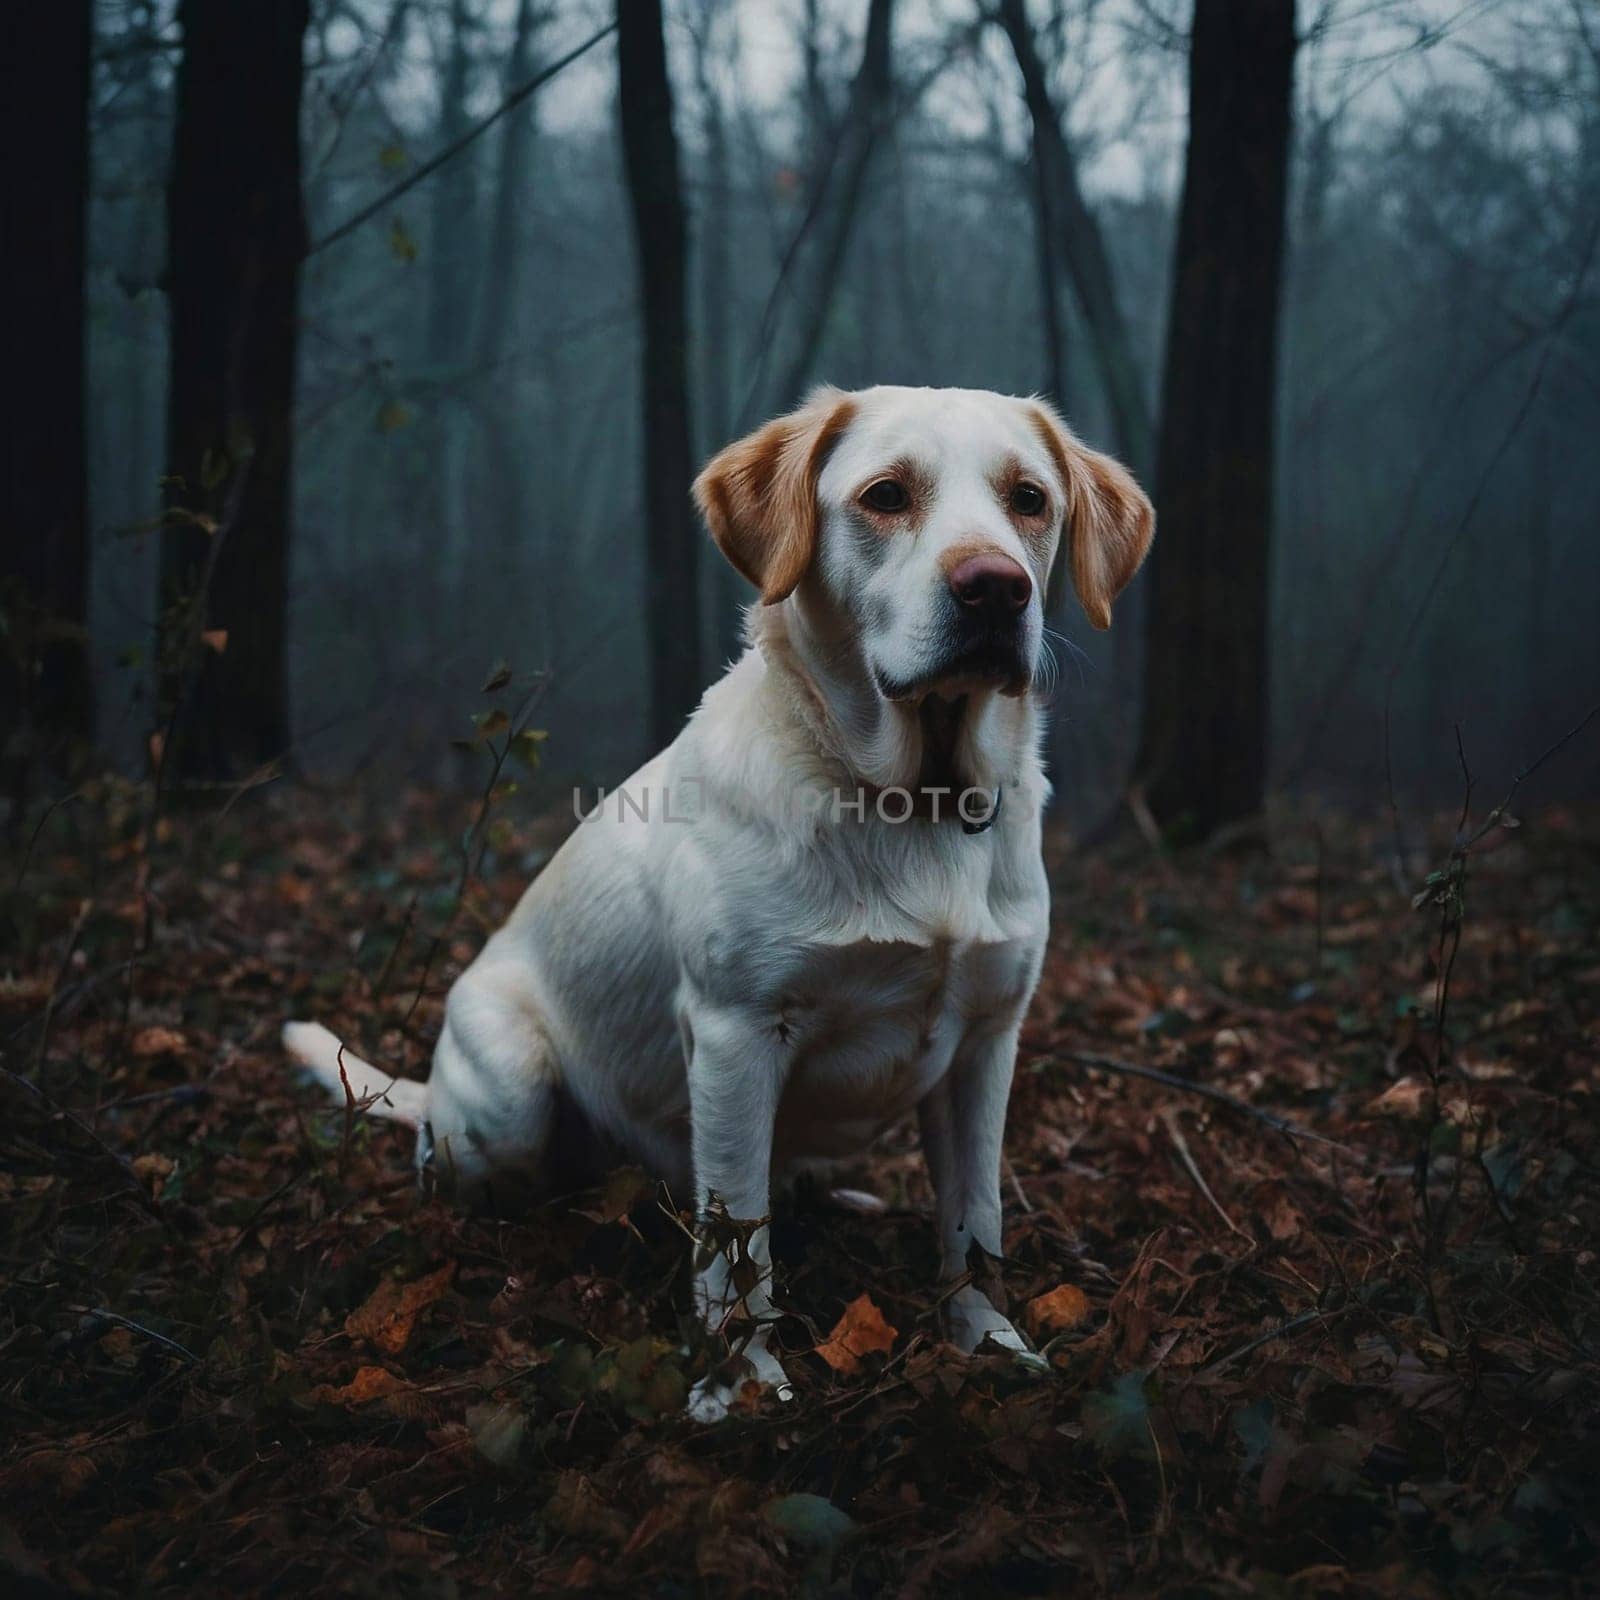 Dog sitting in gloomy autumn forest by VeronikaAngo